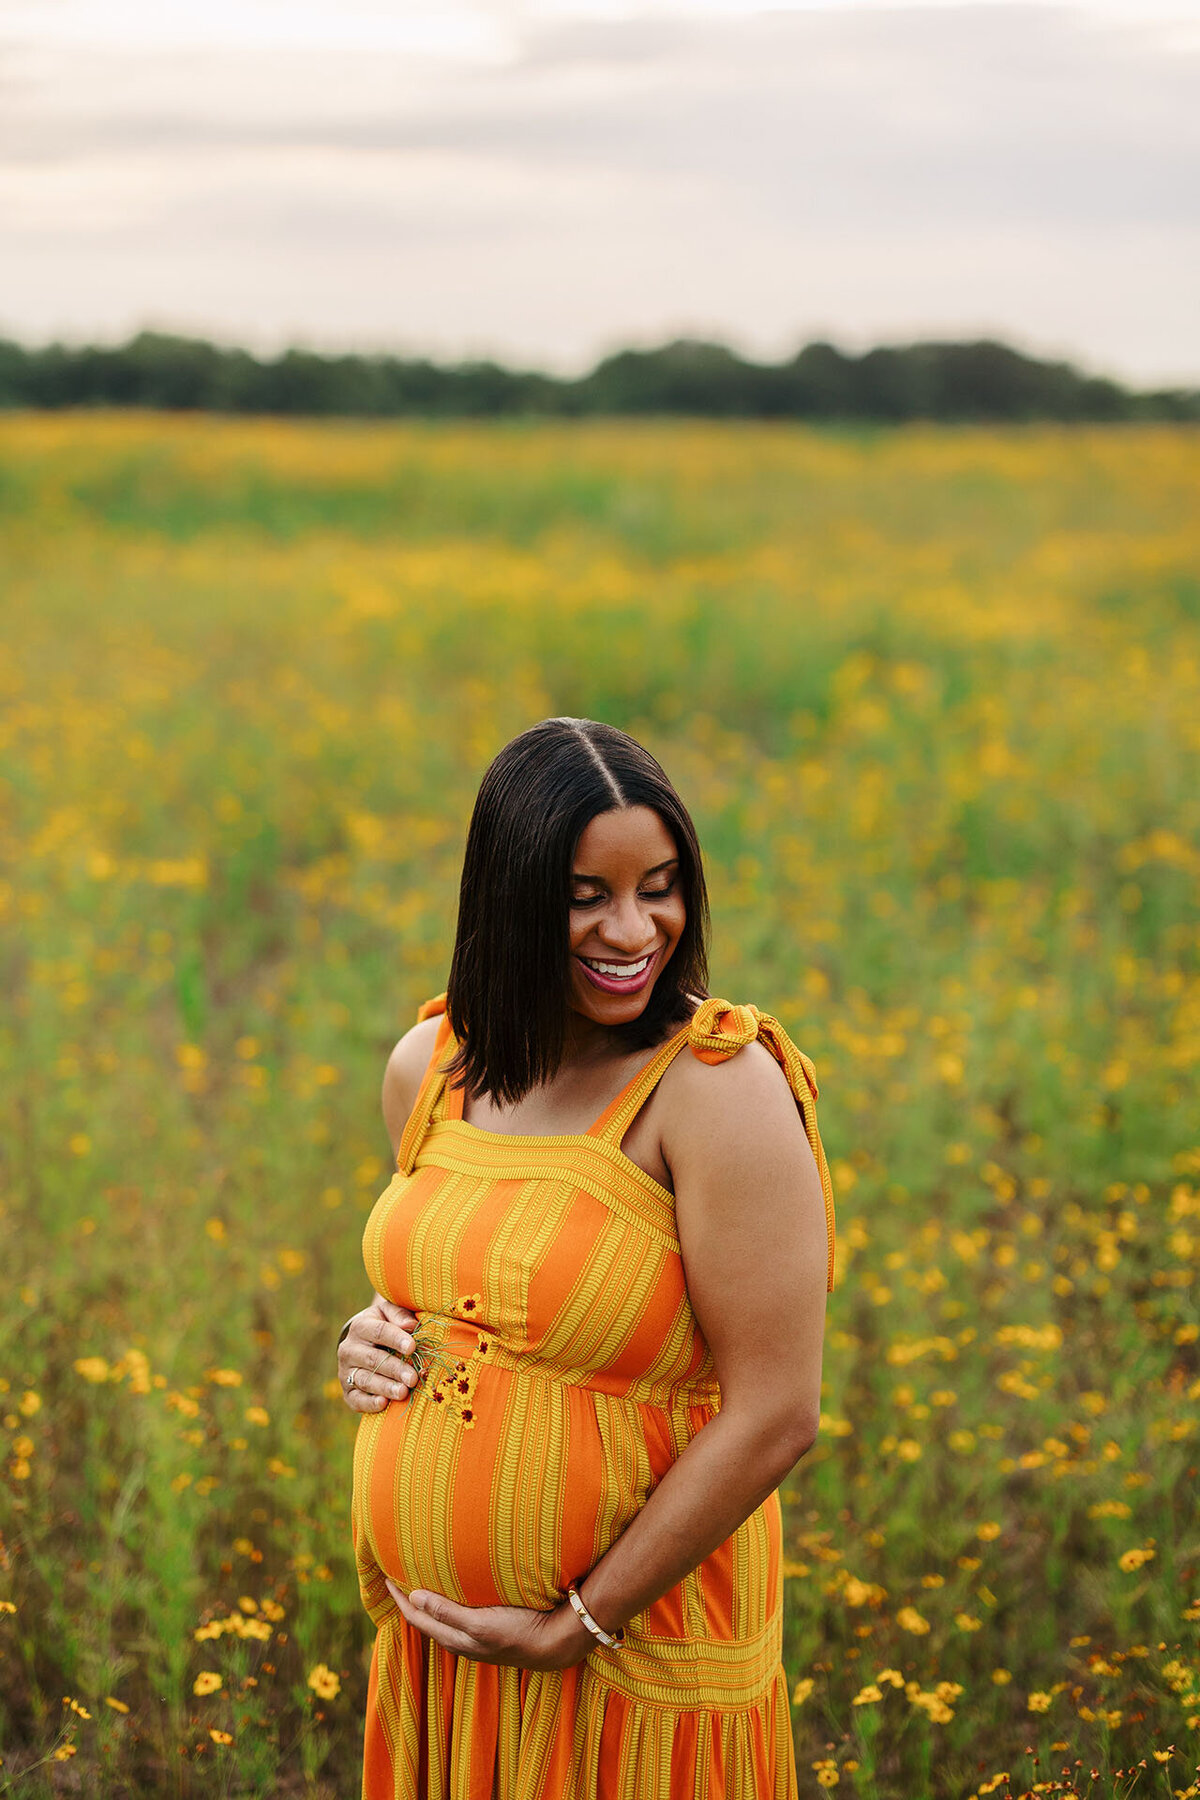 memphis maternity photography by jen howell 19